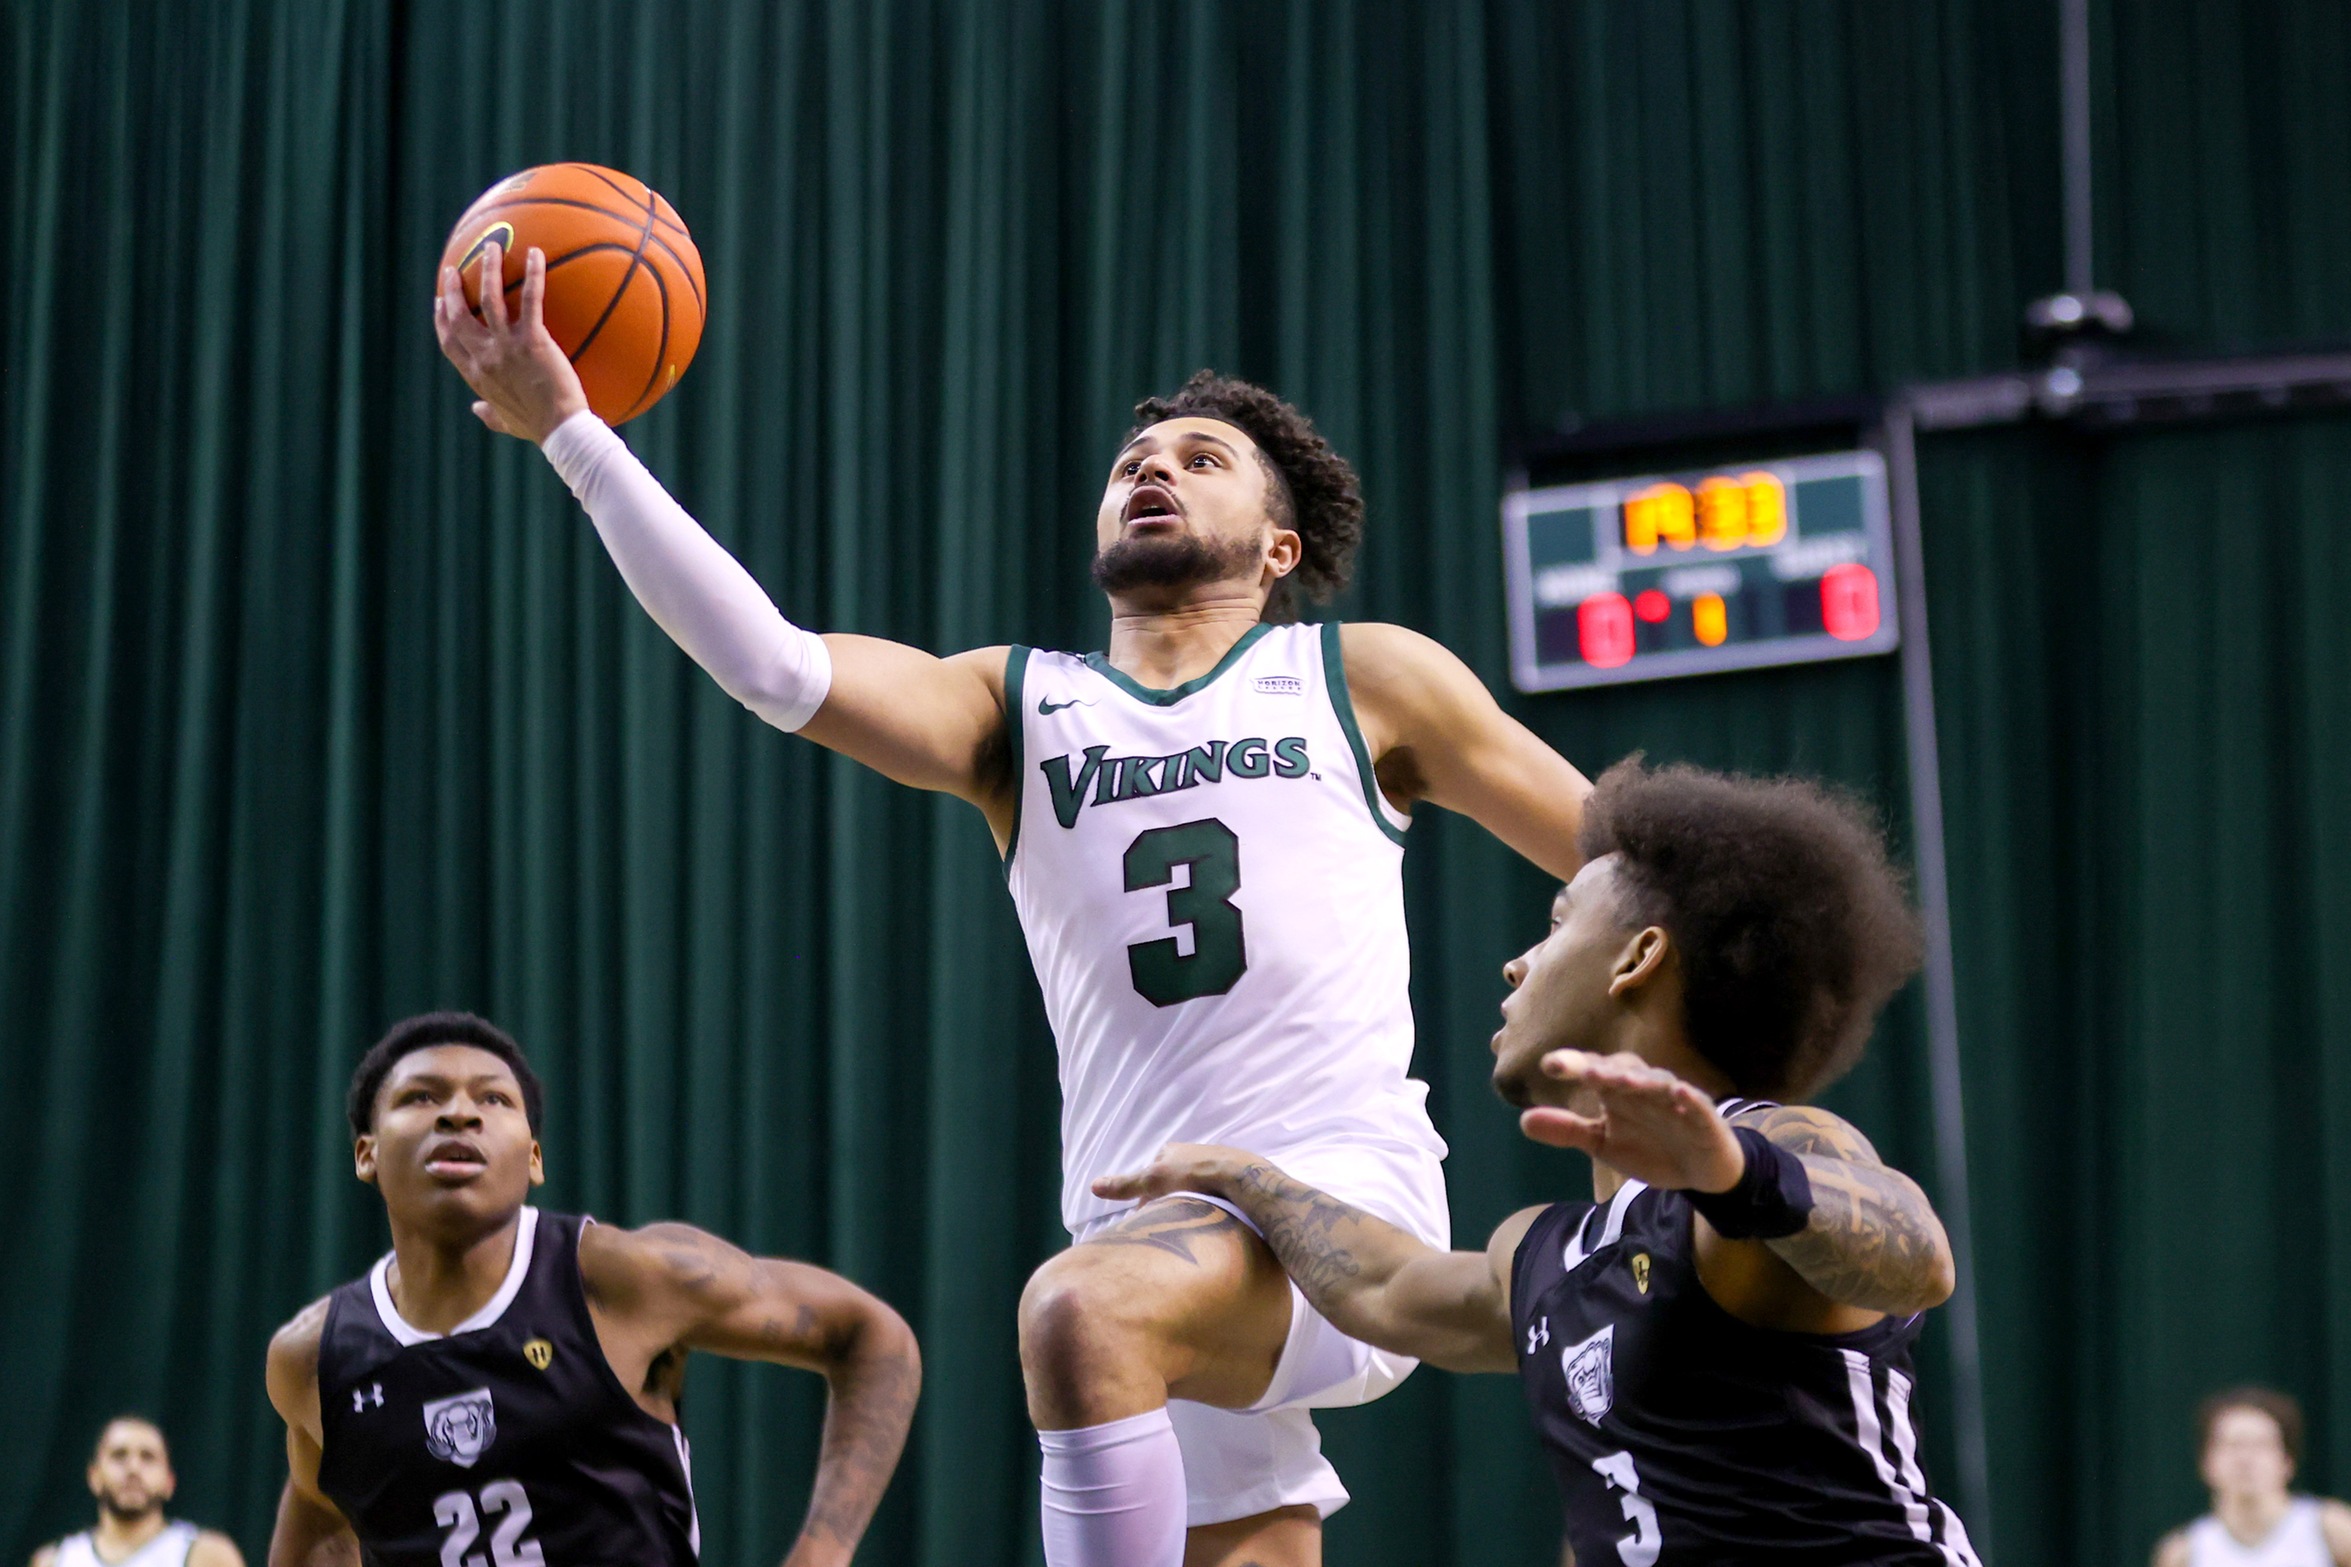 The Streak Continues: Cleveland State Men’s Basketball Earns Comeback Win over Purdue Fort Wayne